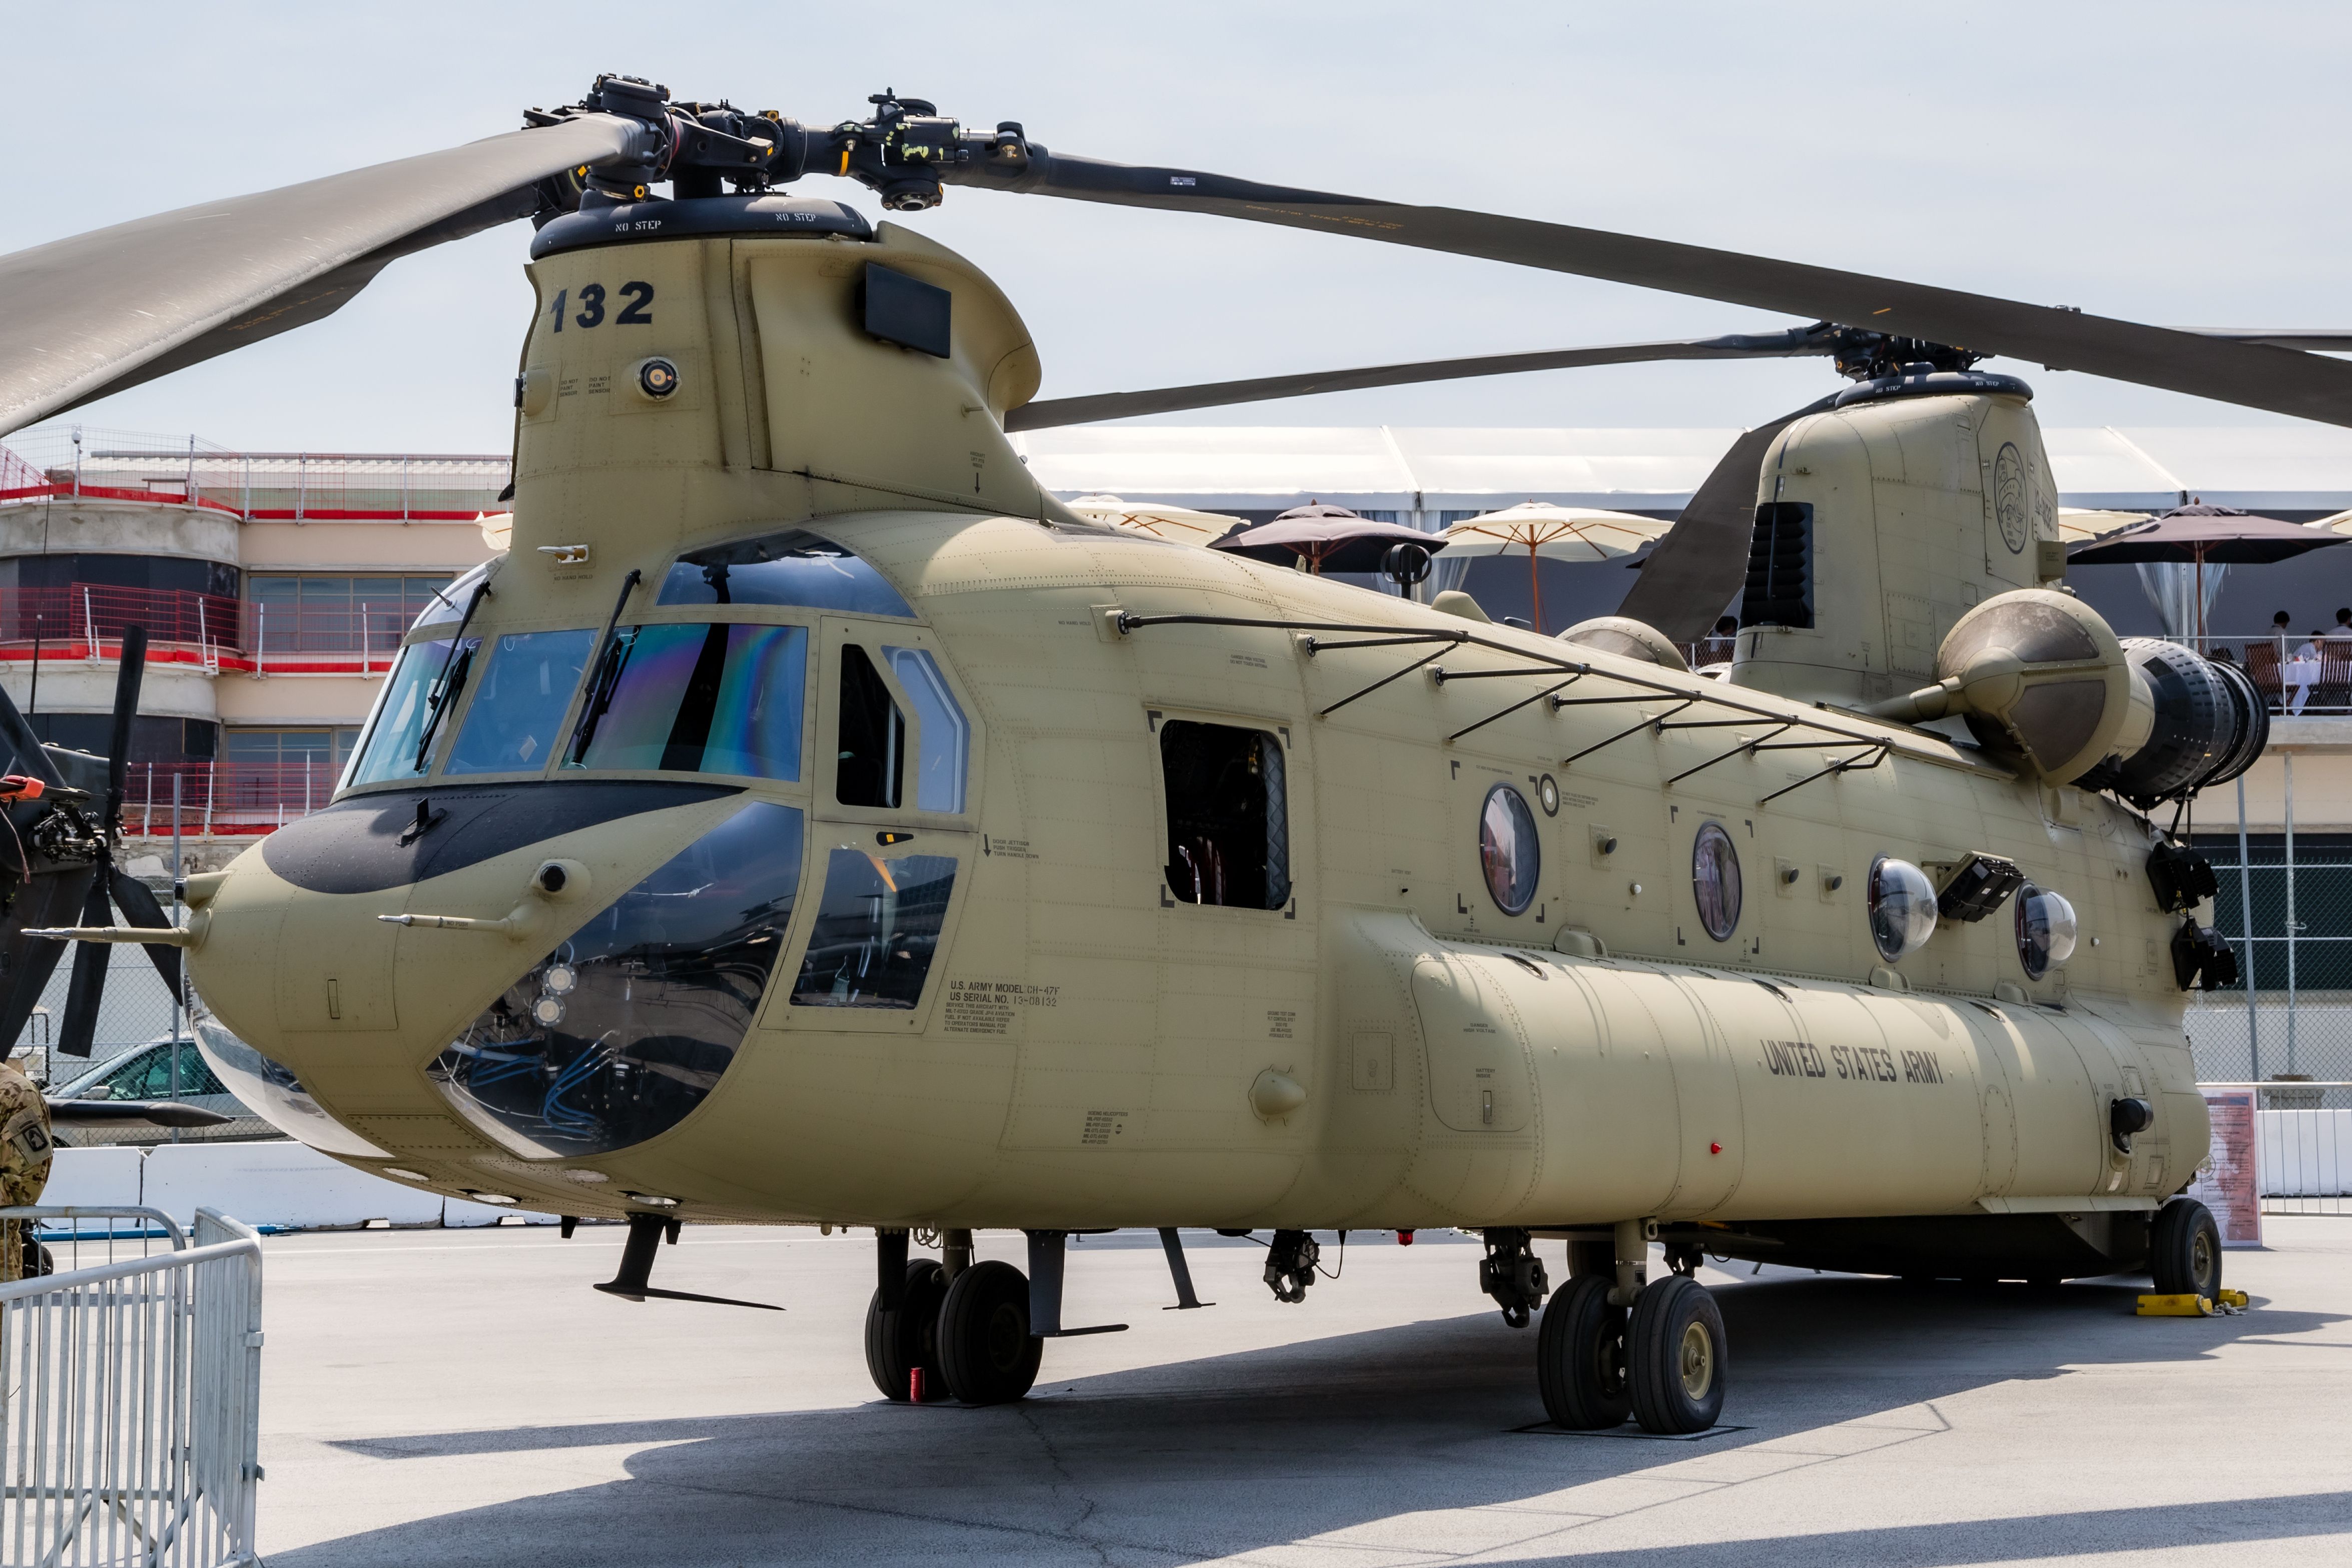 A US Army Boeing CH-47F Chinook transport helicopter at the 2017 Paris Air Show.